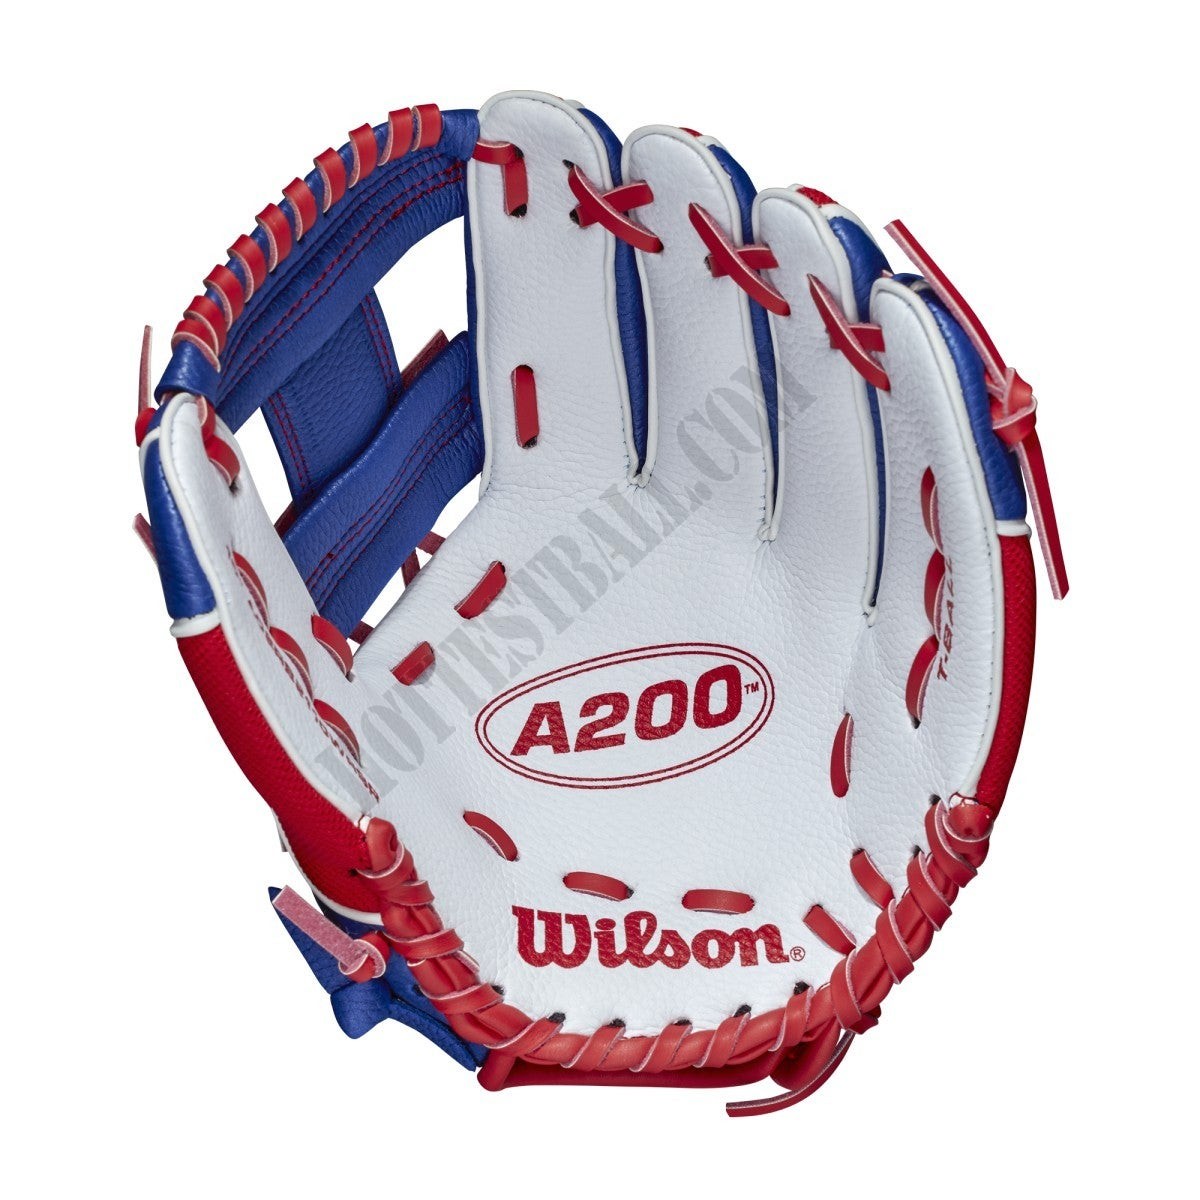 2021 A200 10" T-Ball Glove - Royal/Red/White ● Wilson Promotions - -2